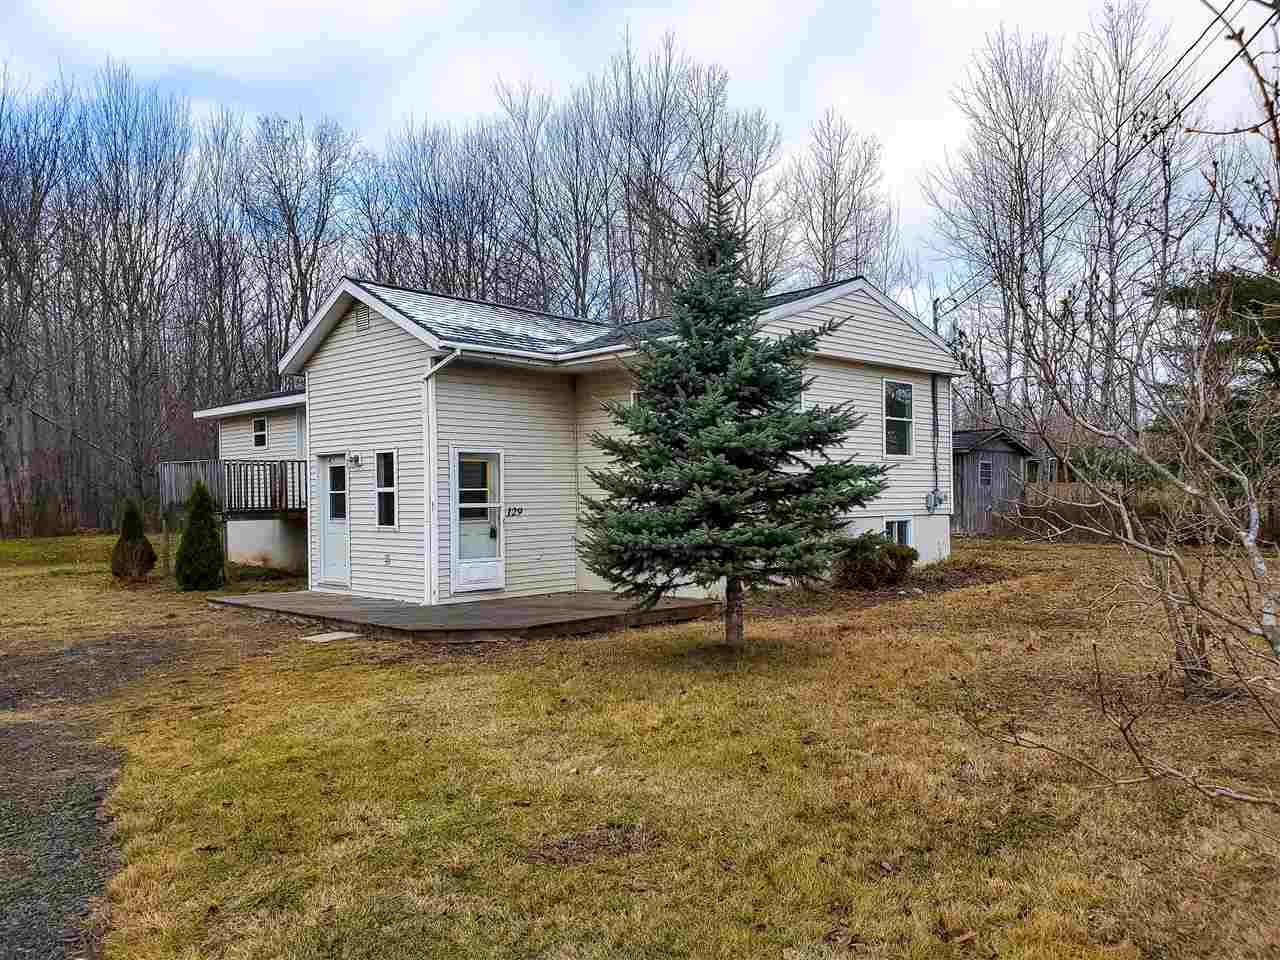 Main Photo: 129 Morden Road in Auburn: 404-Kings County Residential for sale (Annapolis Valley)  : MLS®# 202025231